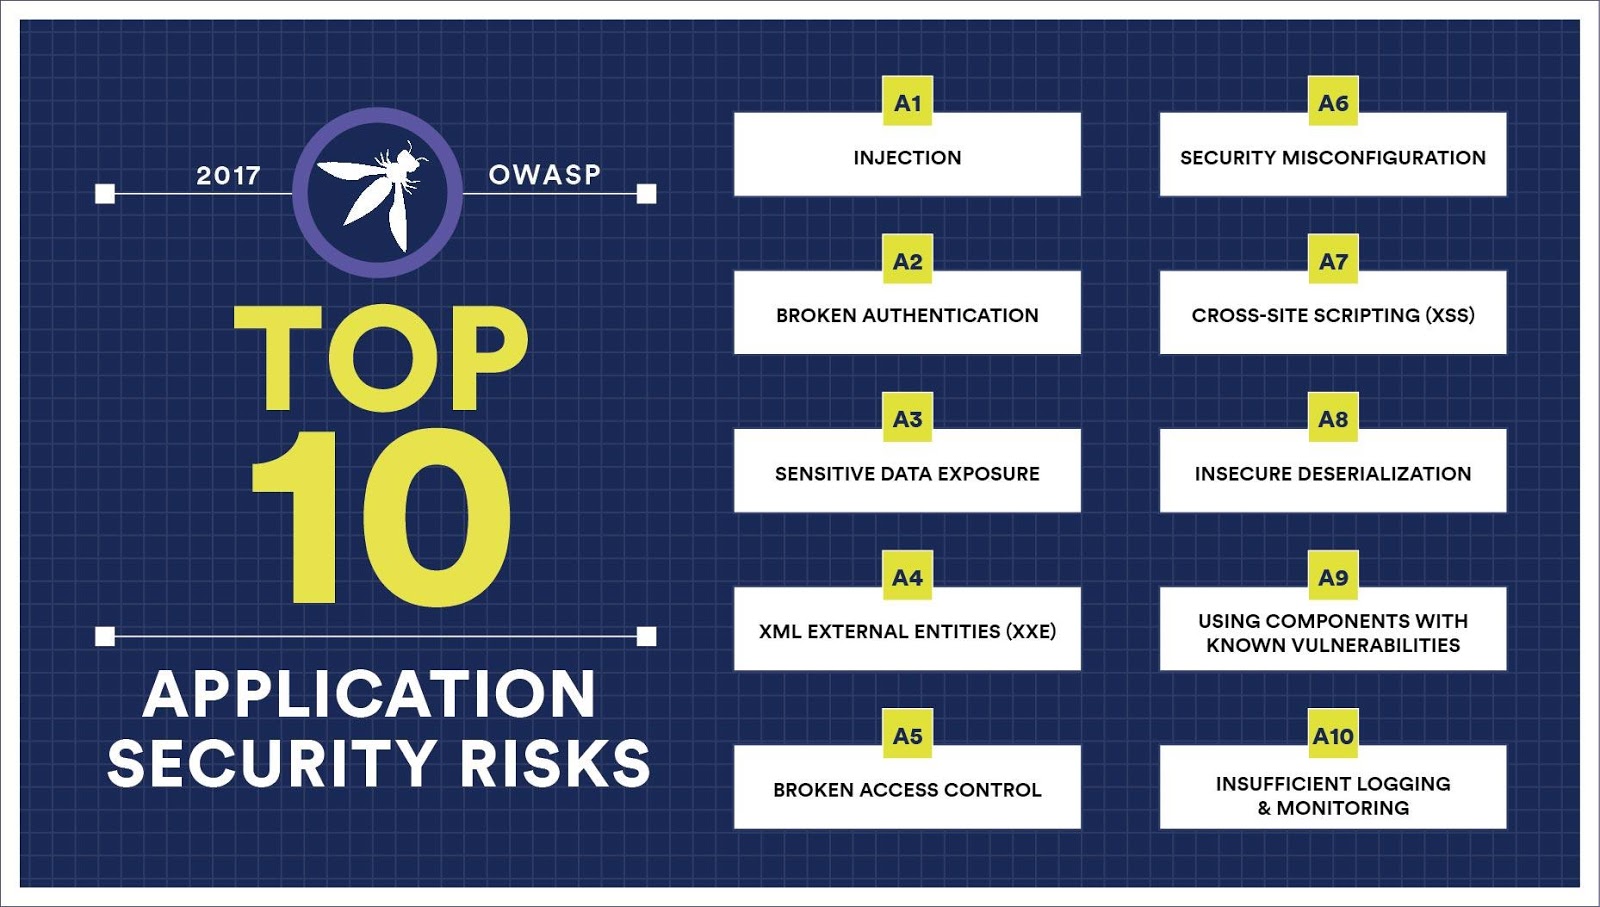 The Top 10 Application Security Risks